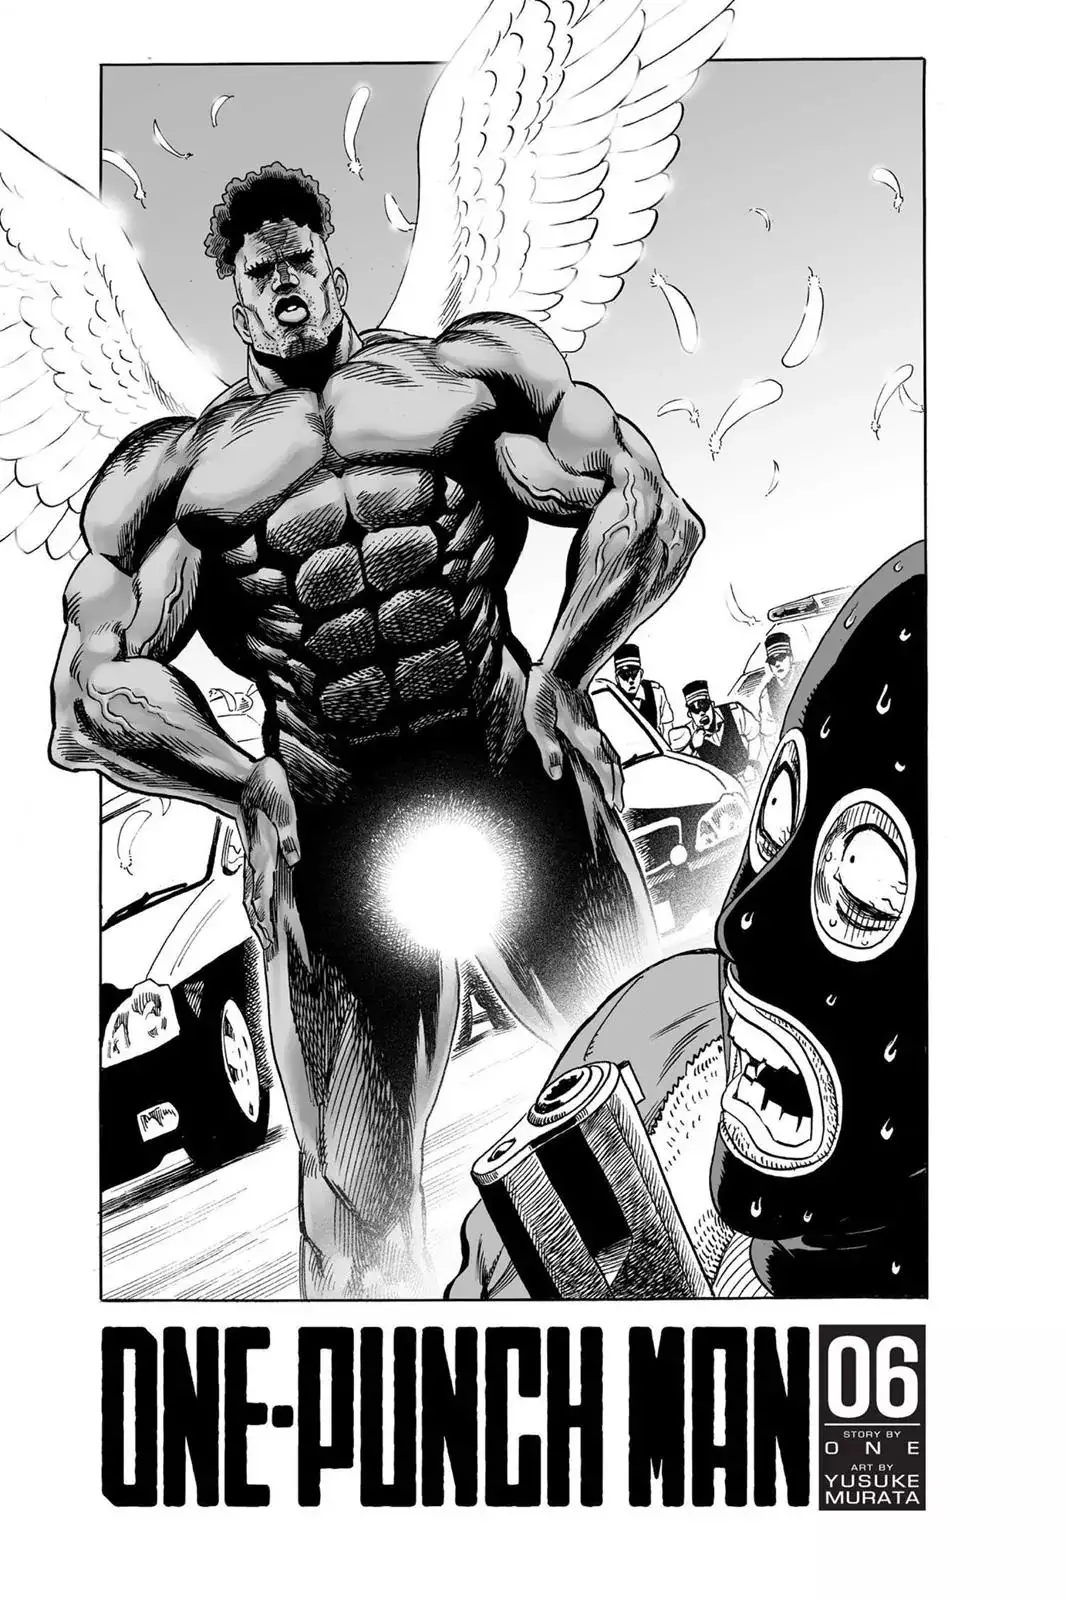 One Punch Man Chapter 30, READ One Punch Man Chapter 30 ONLINE, lost in the cloud genre,lost in the cloud gif,lost in the cloud girl,lost in the cloud goods,lost in the cloud goodreads,lost in the cloud,lost ark cloud gaming,lost odyssey cloud gaming,lost in the cloud fanart,lost in the cloud fanfic,lost in the cloud fandom,lost in the cloud first kiss,lost in the cloud font,lost in the cloud ending,lost in the cloud episode 97,lost in the cloud edit,lost in the cloud explained,lost in the cloud dog,lost in the cloud discord server,lost in the cloud desktop wallpaper,lost in the cloud drawing,can't find my cloud on network,lost in the cloud characters,lost in the cloud chapter 93 release date,lost in the cloud birthday,lost in the cloud birthday art,lost in the cloud background,lost in the cloud banner,lost in the clouds meaning,what is the black cloud in lost,lost in the cloud ao3,lost in the cloud anime,lost in the cloud art,lost in the cloud author twitter,lost in the cloud author instagram,lost in the cloud artist,lost in the cloud acrylic stand,lost in the cloud artist twitter,lost in the cloud art style,lost in the cloud analysis